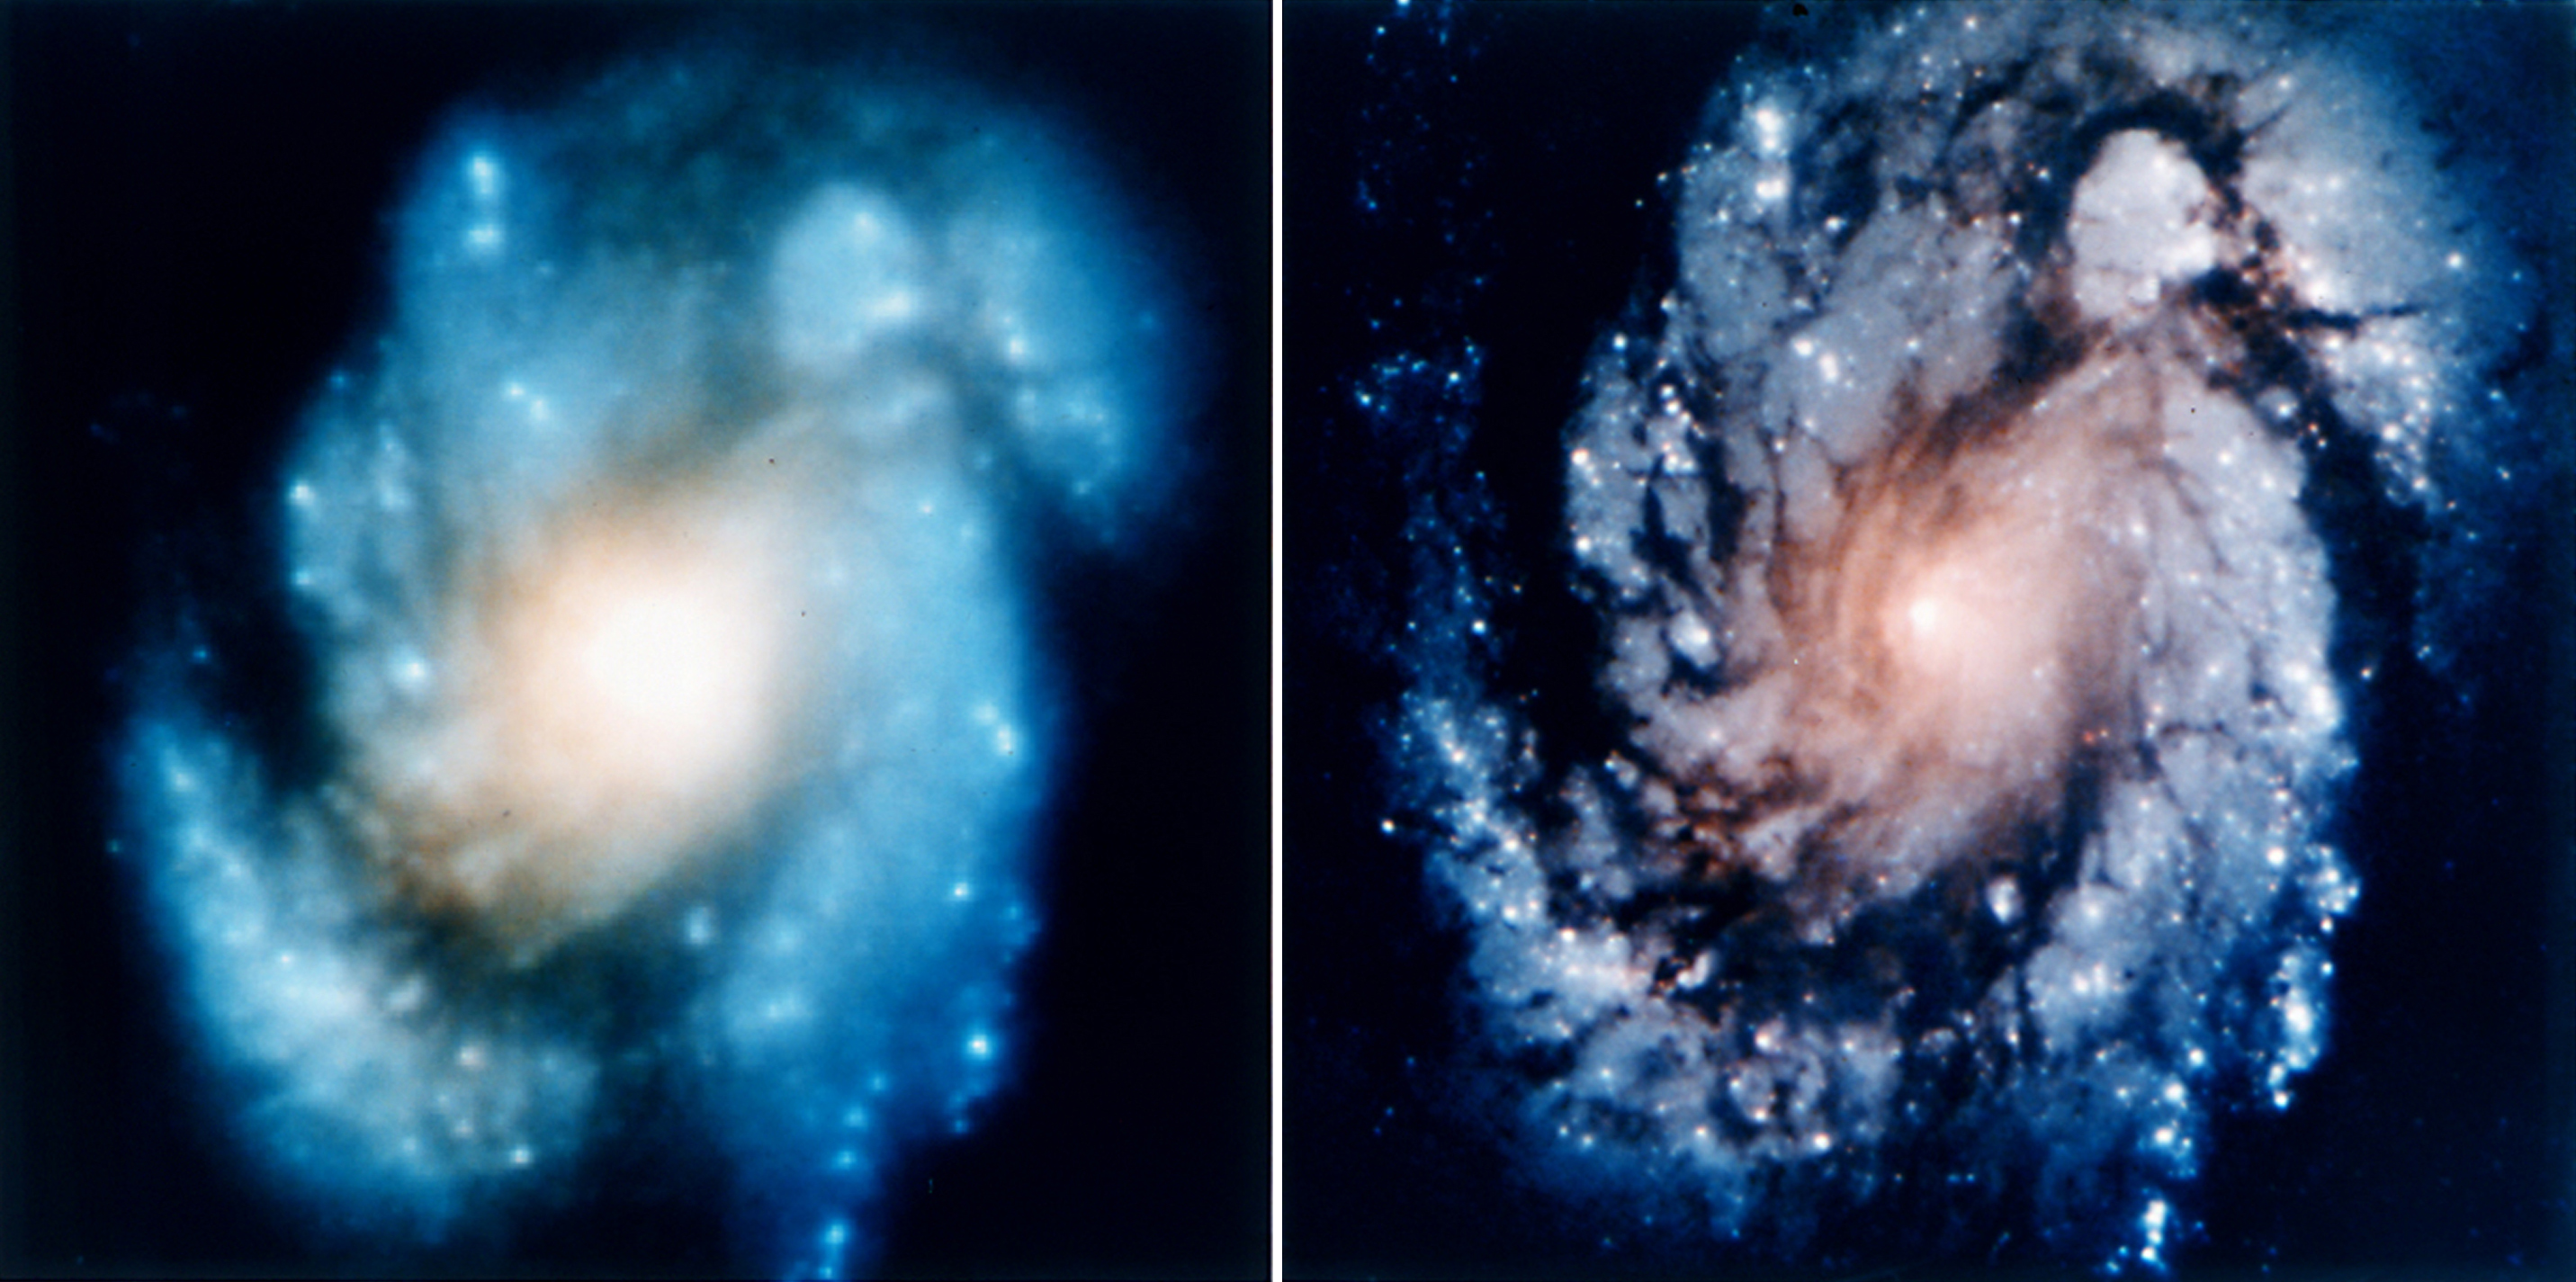 Hubble Images of M100 Before and After Repair